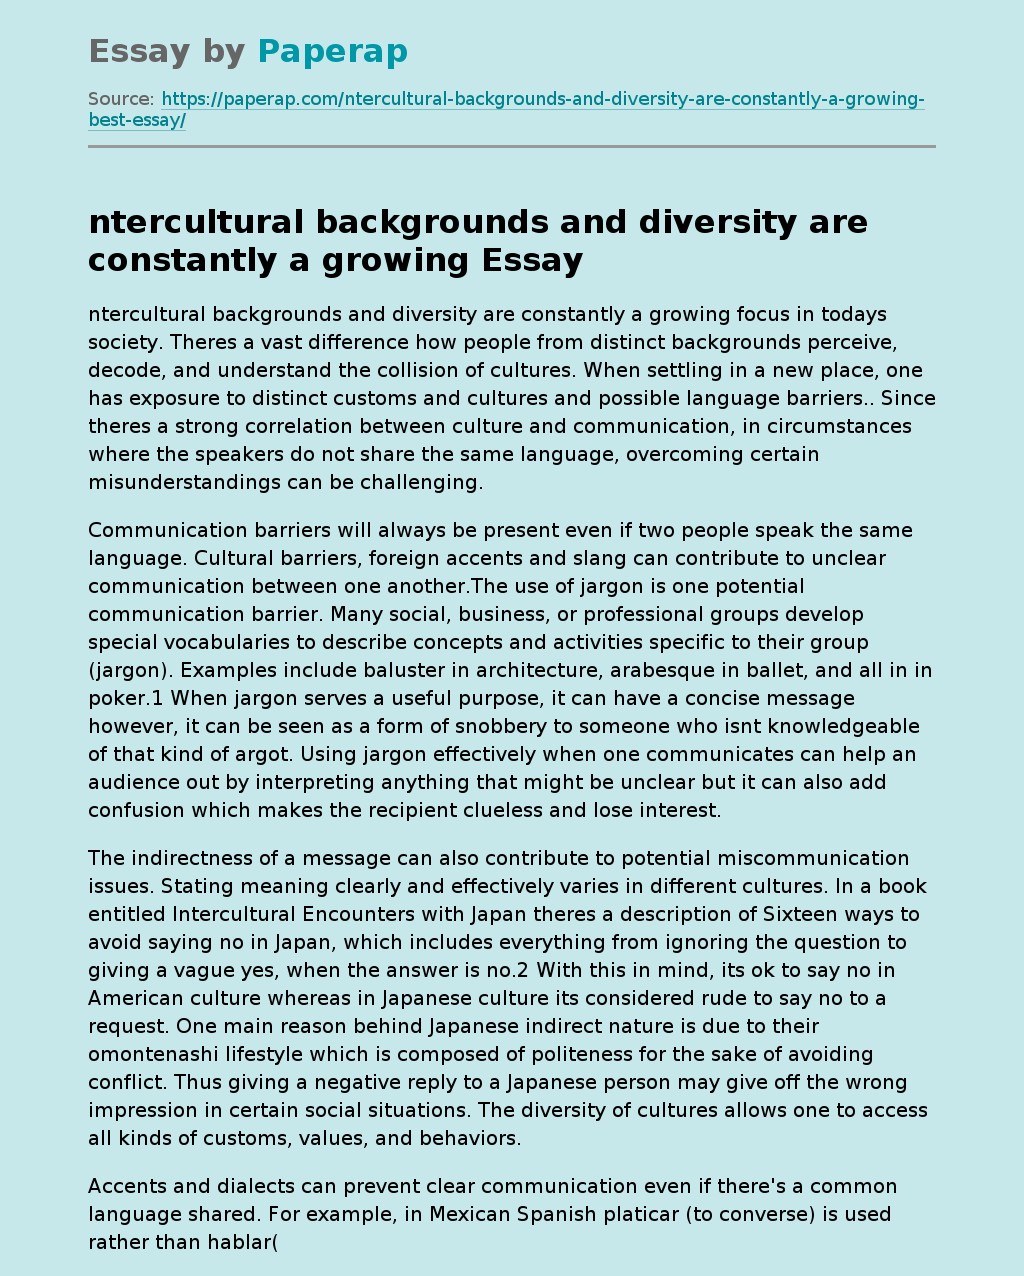 ntercultural backgrounds and diversity are constantly a growing